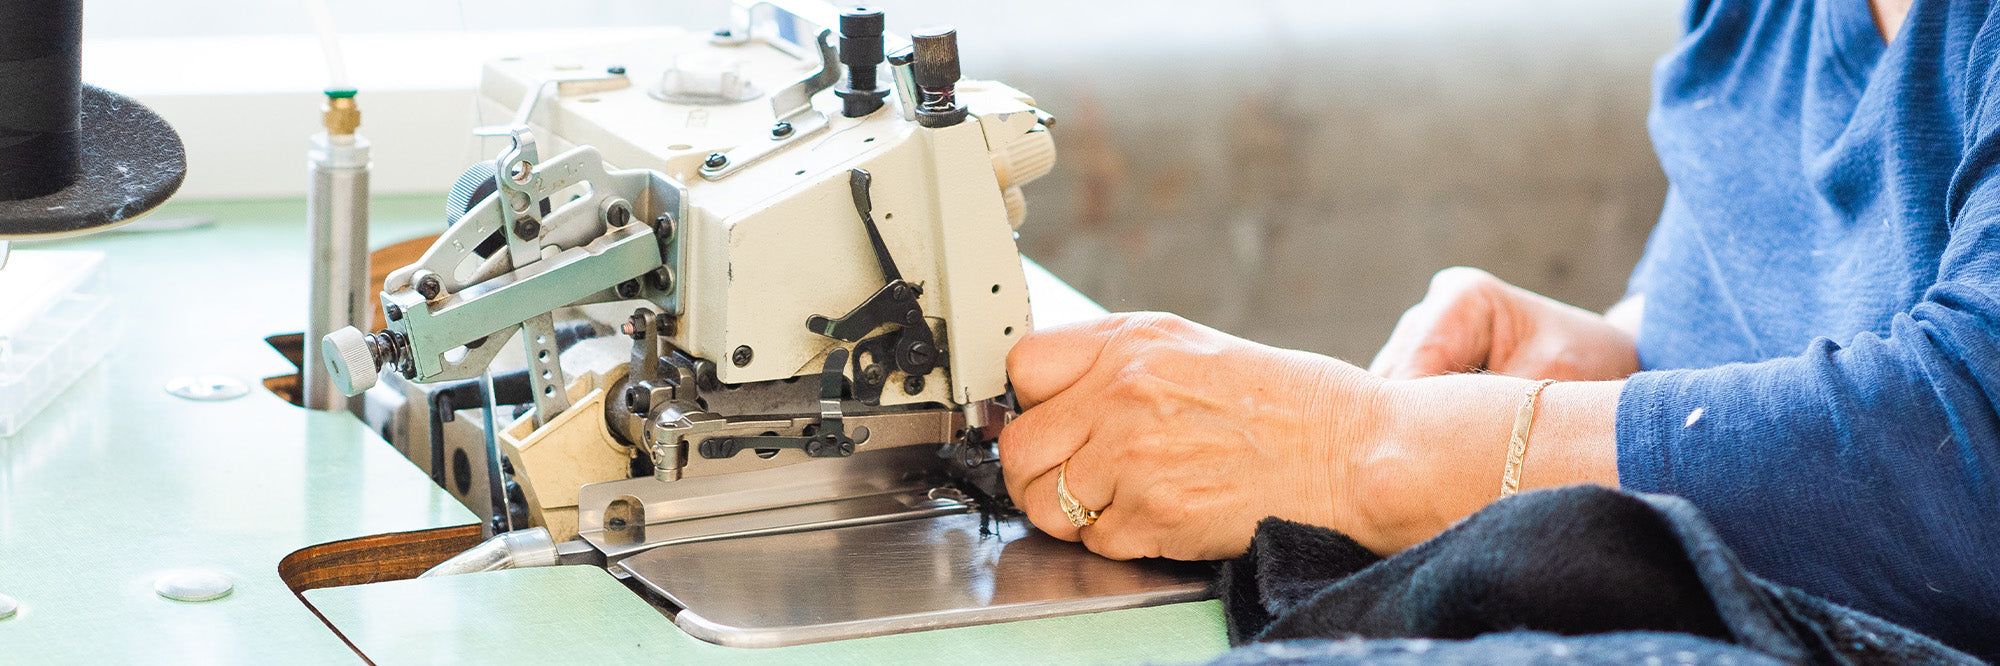 Contract Sewing and Packaging Services, American Blanket Company